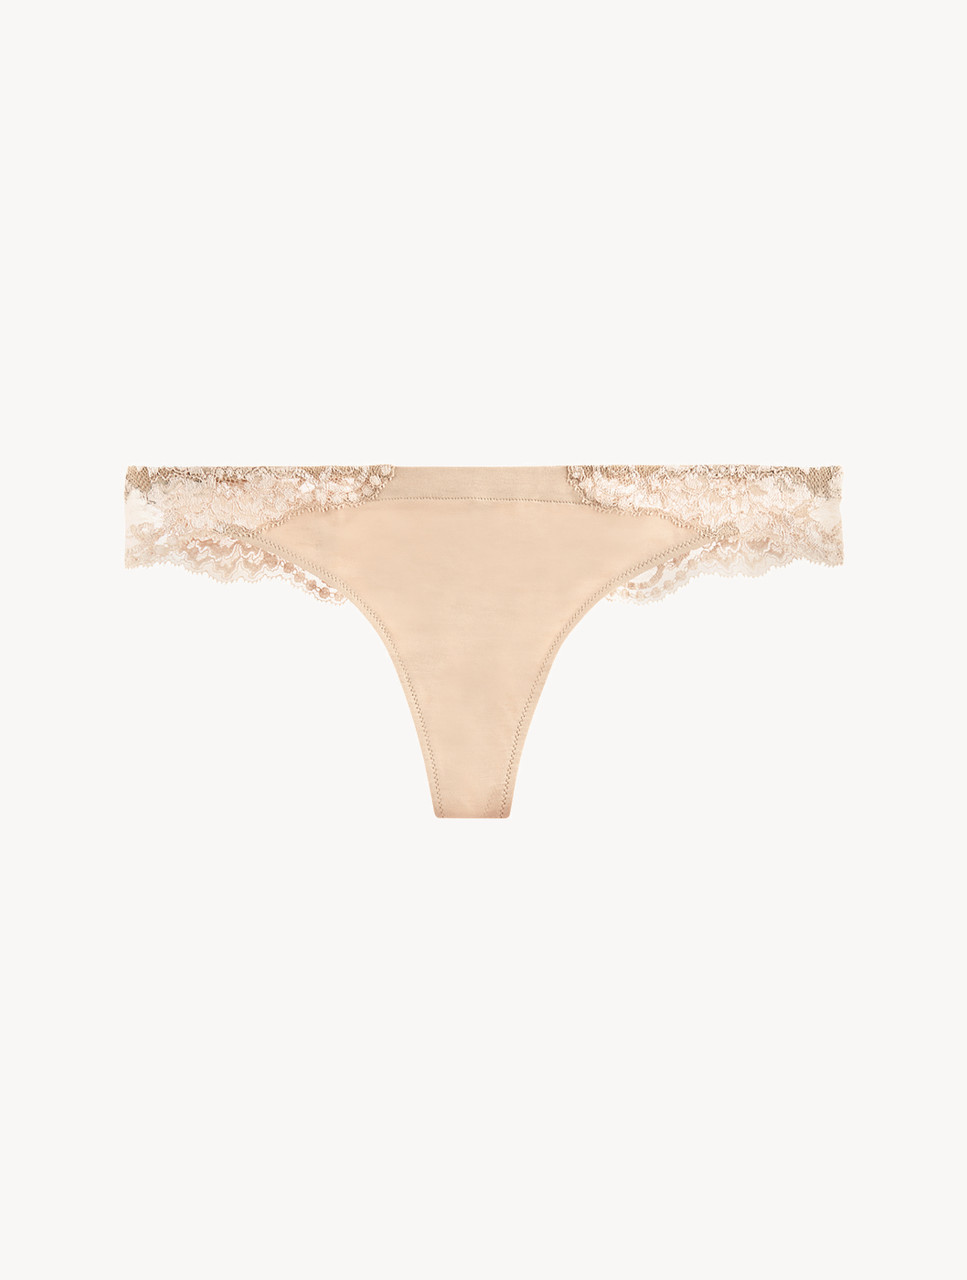 Nude Basic Lace G String Thong, Lingerie